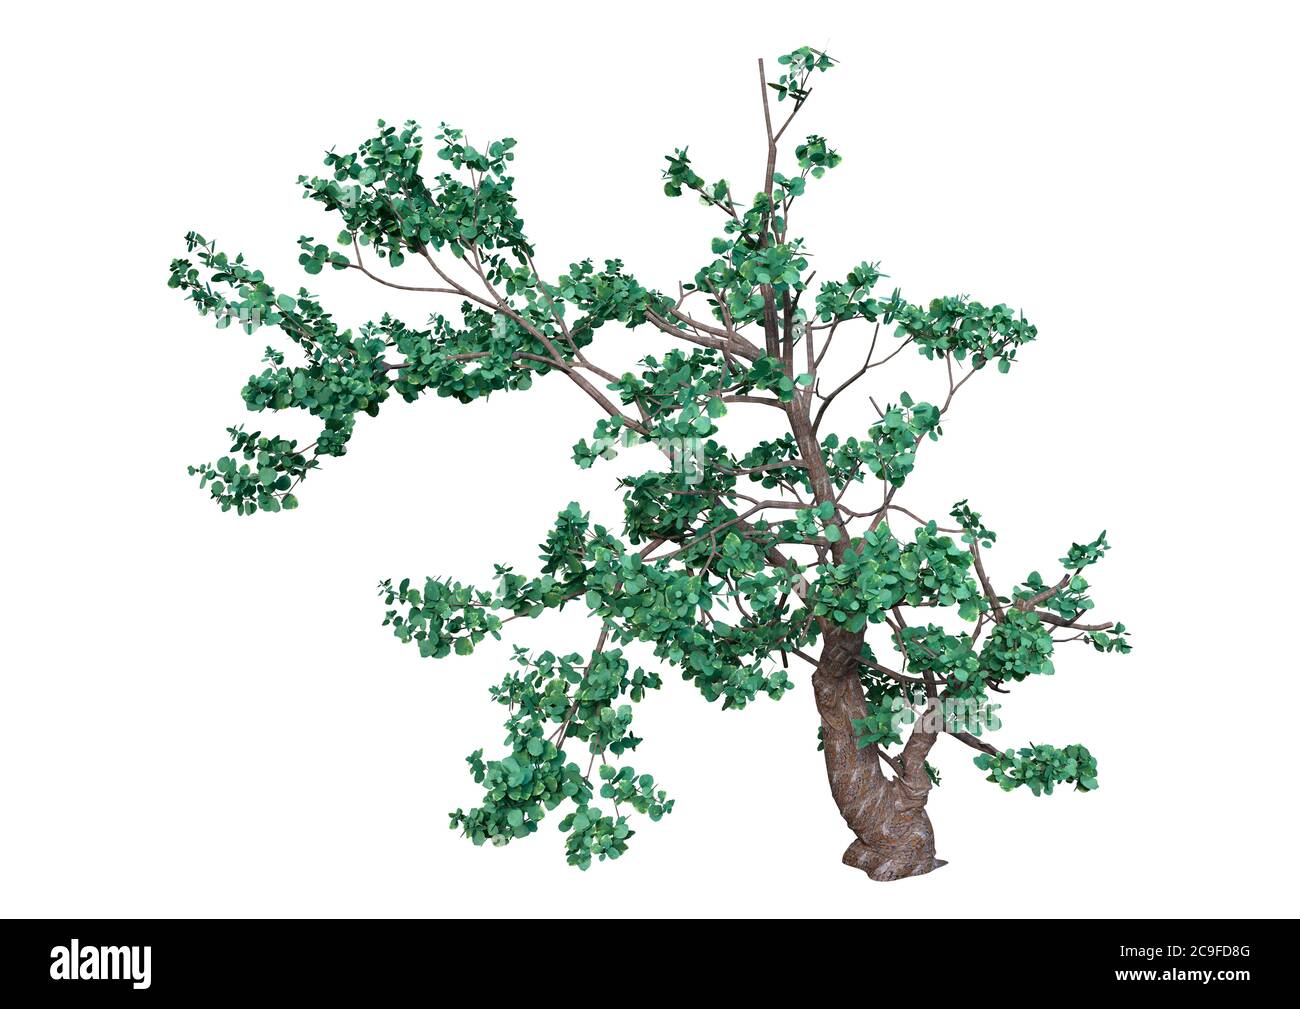 3D rendering of a green Island oak tree or Quercus tomentella isolated on white background Stock Photo